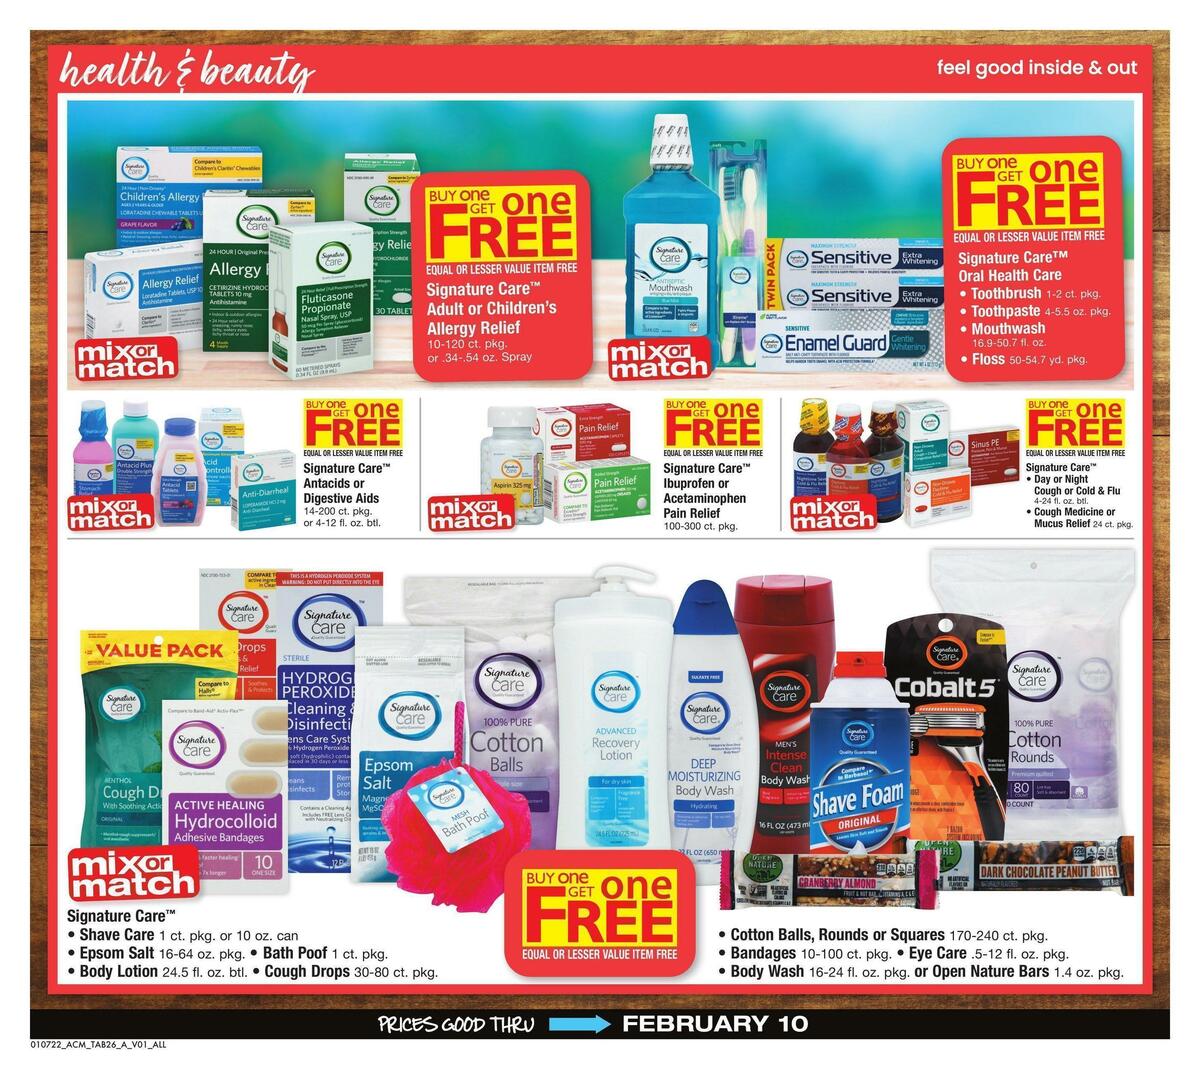 ACME Markets Big Book of Savings Weekly Ad from January 7